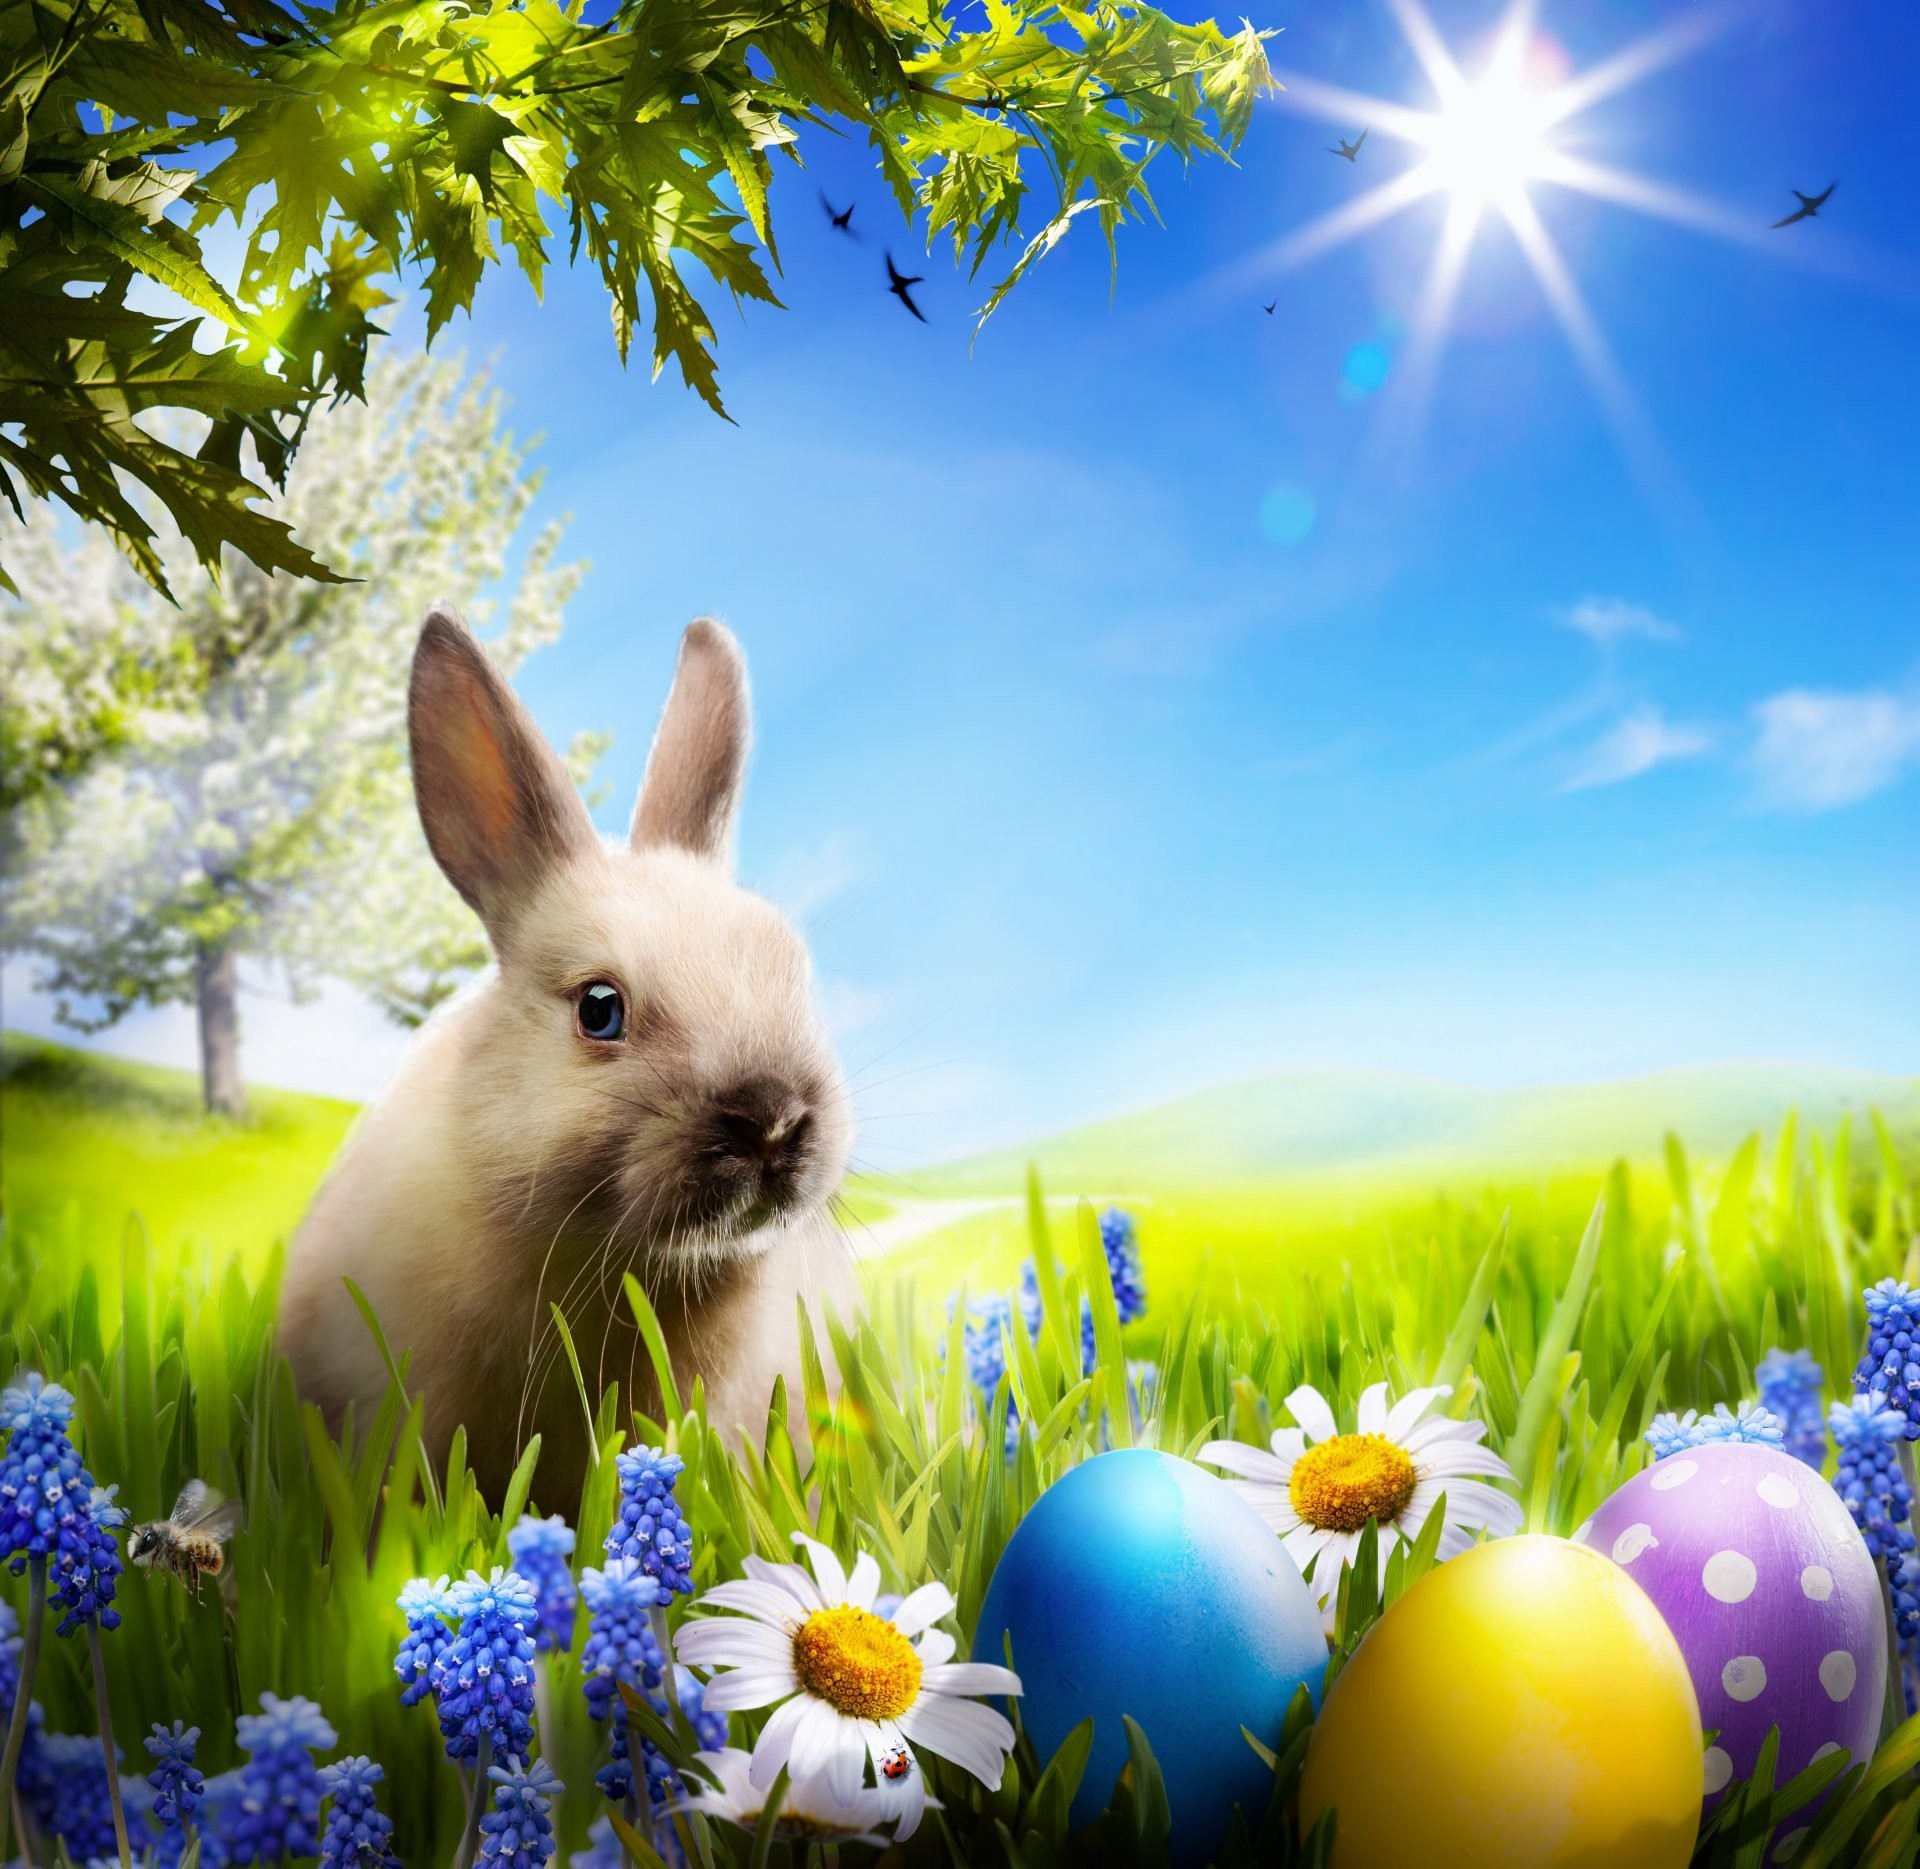 easter bunny wallpaper,easter egg,easter,rabbits and hares,domestic rabbit,grass